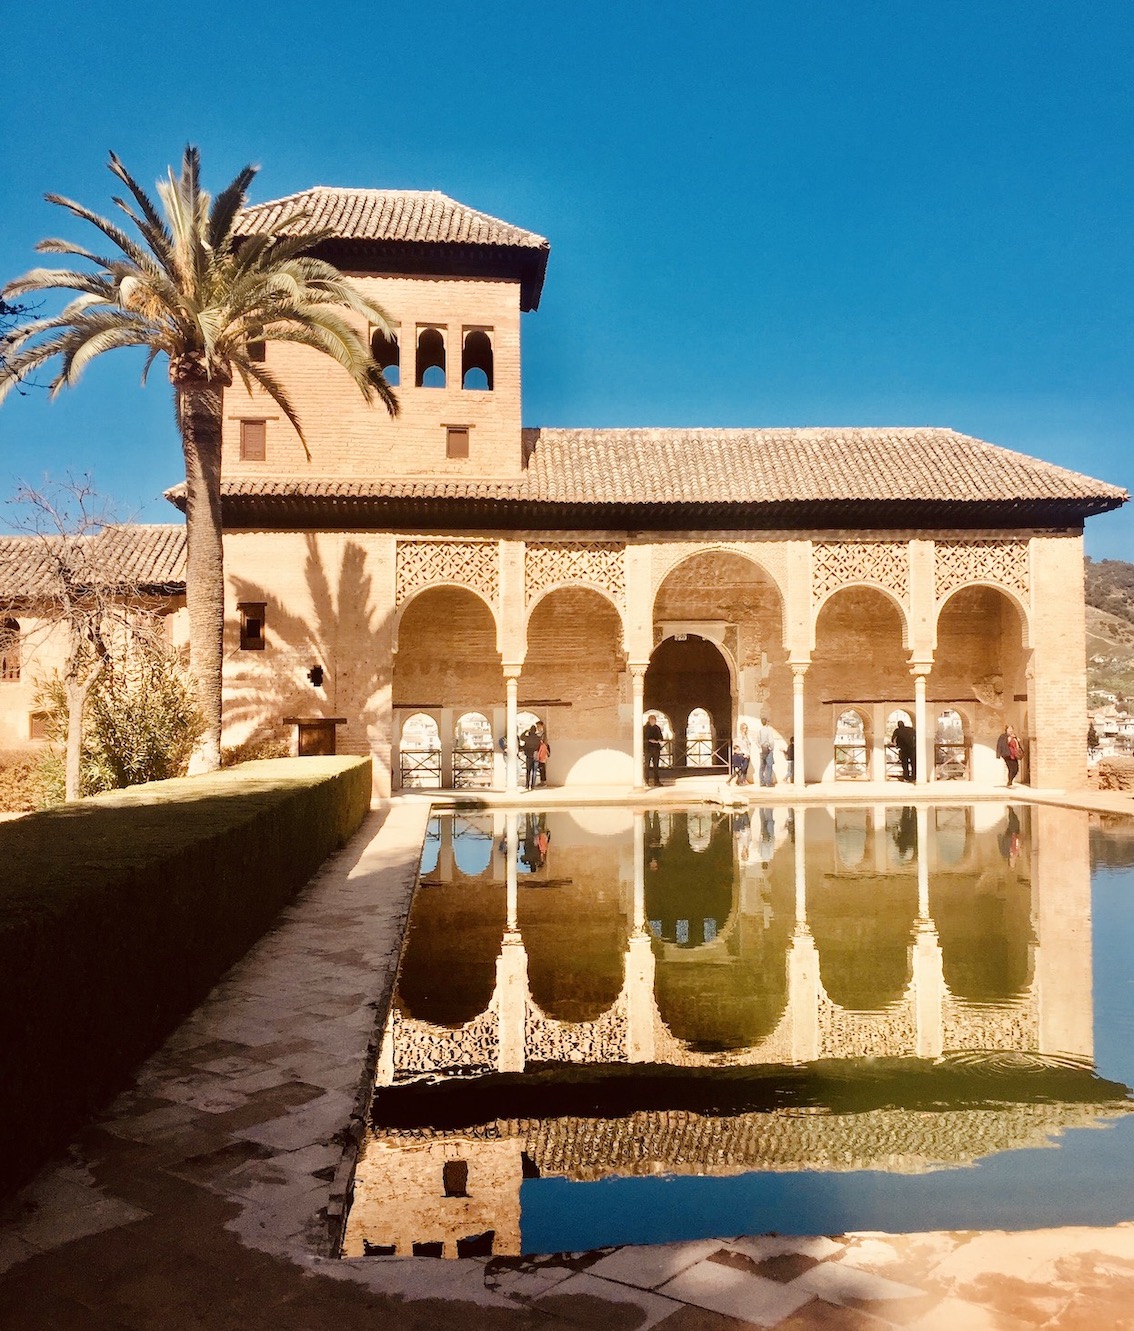 The Alhambra Palace Gardens.